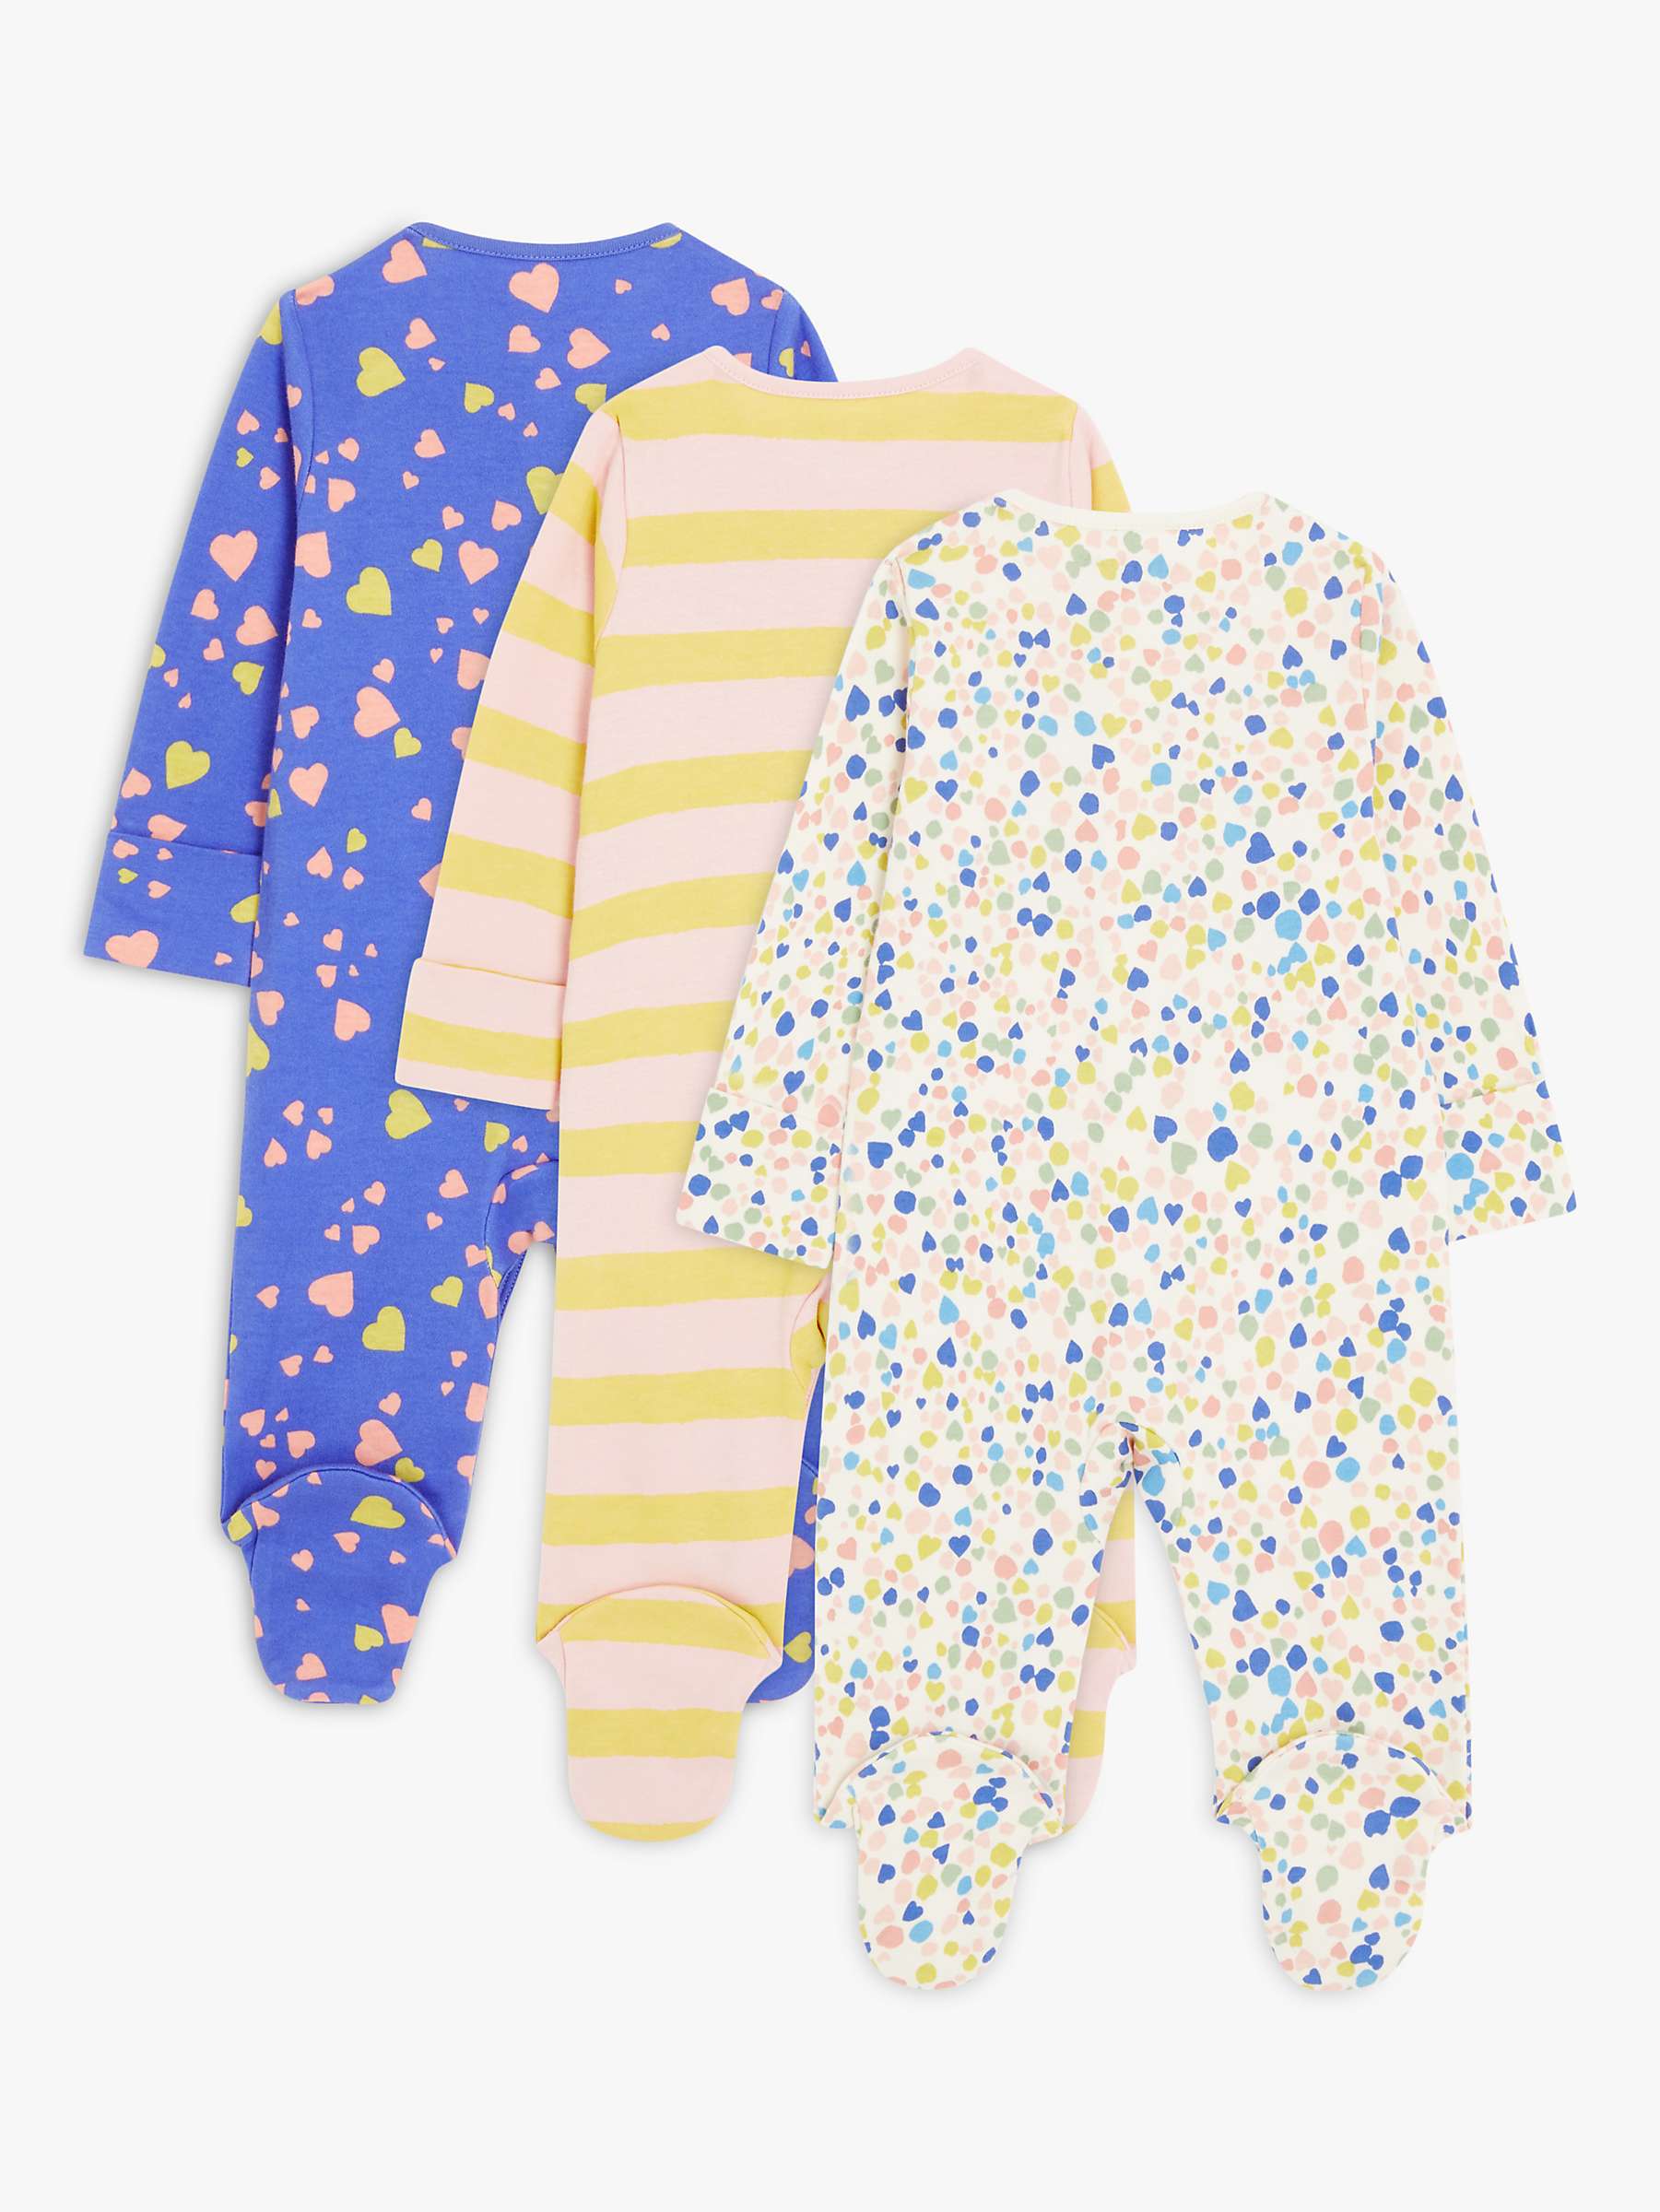 Buy John Lewis ANYDAY Baby Confetti/Heart/Stripe Sleepsuits, Pack of 3, Multi Online at johnlewis.com